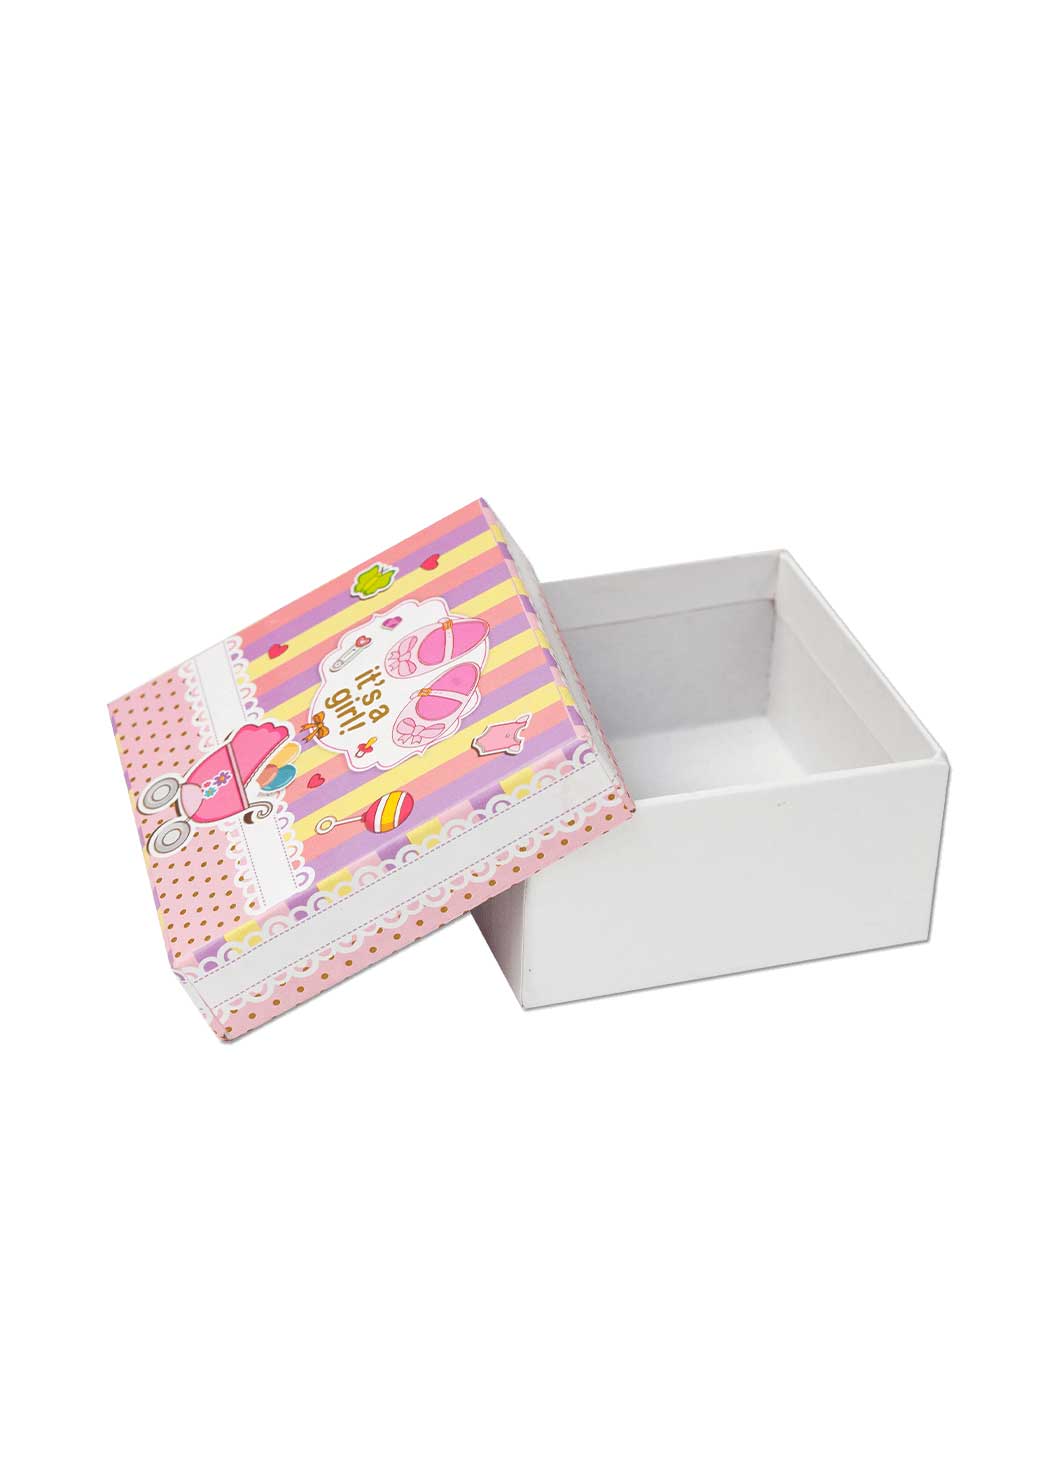 it's a girl sweet box pink box with it's a girl print 1 pao sweet box 250 gm it's a girl sweet box baby announcement box empty box mithai box for sweet packaging